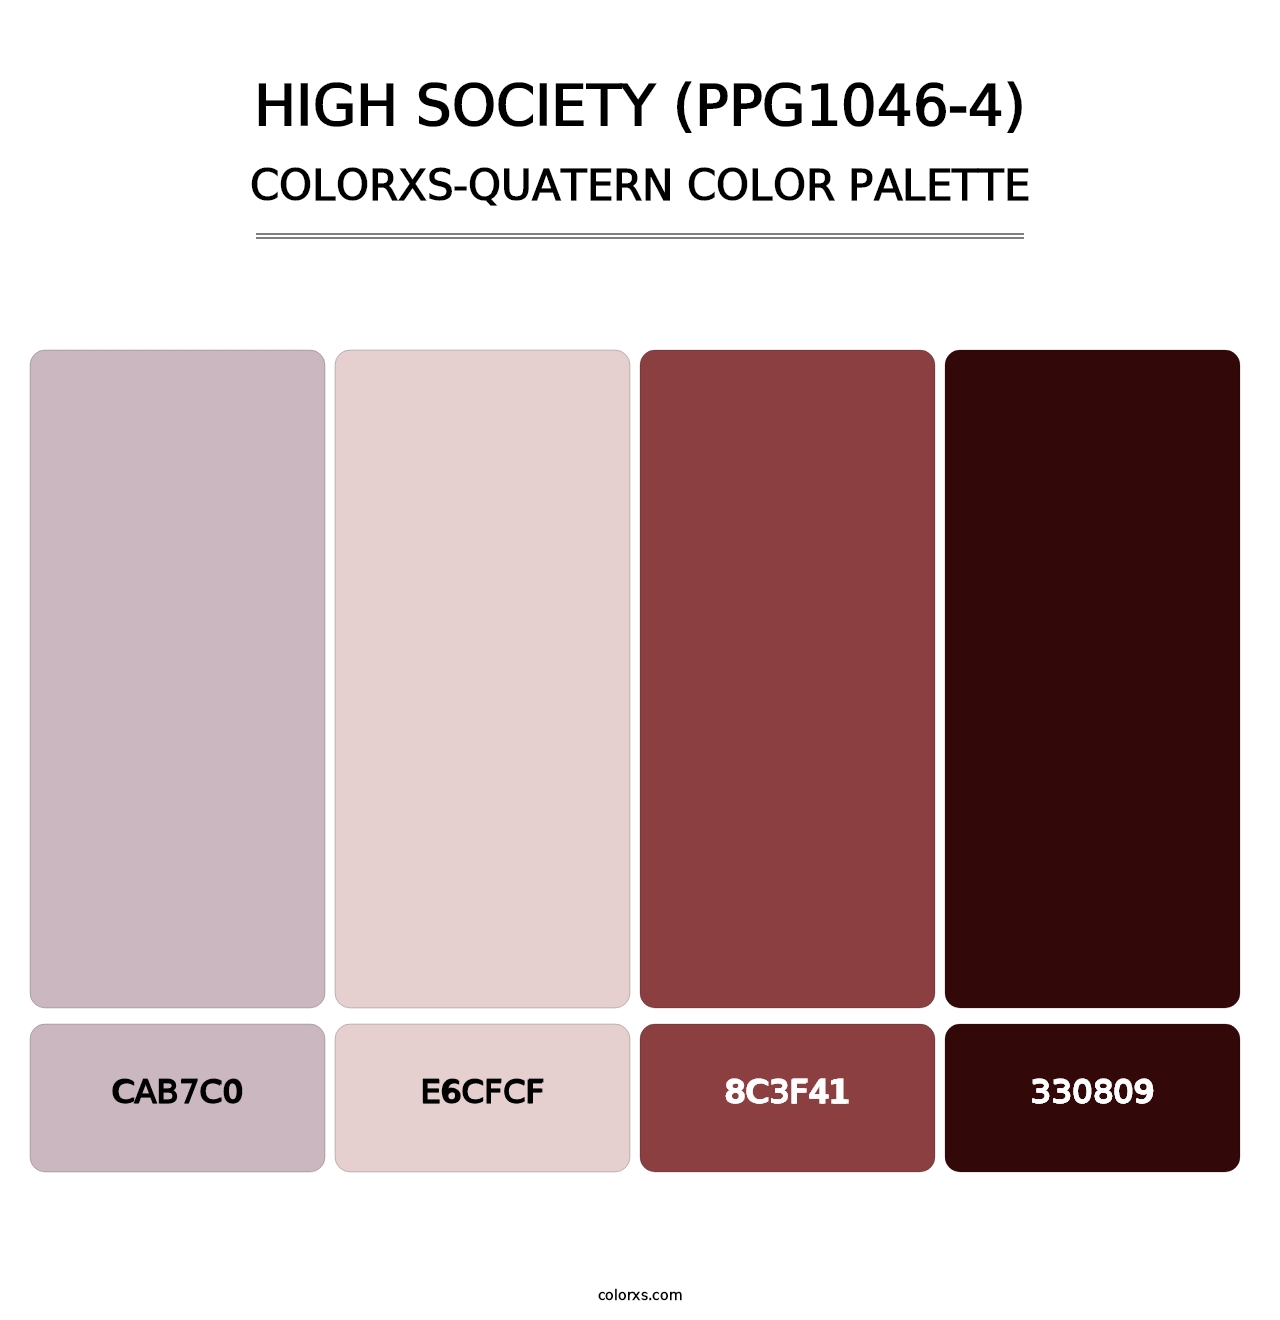 High Society (PPG1046-4) - Colorxs Quatern Palette